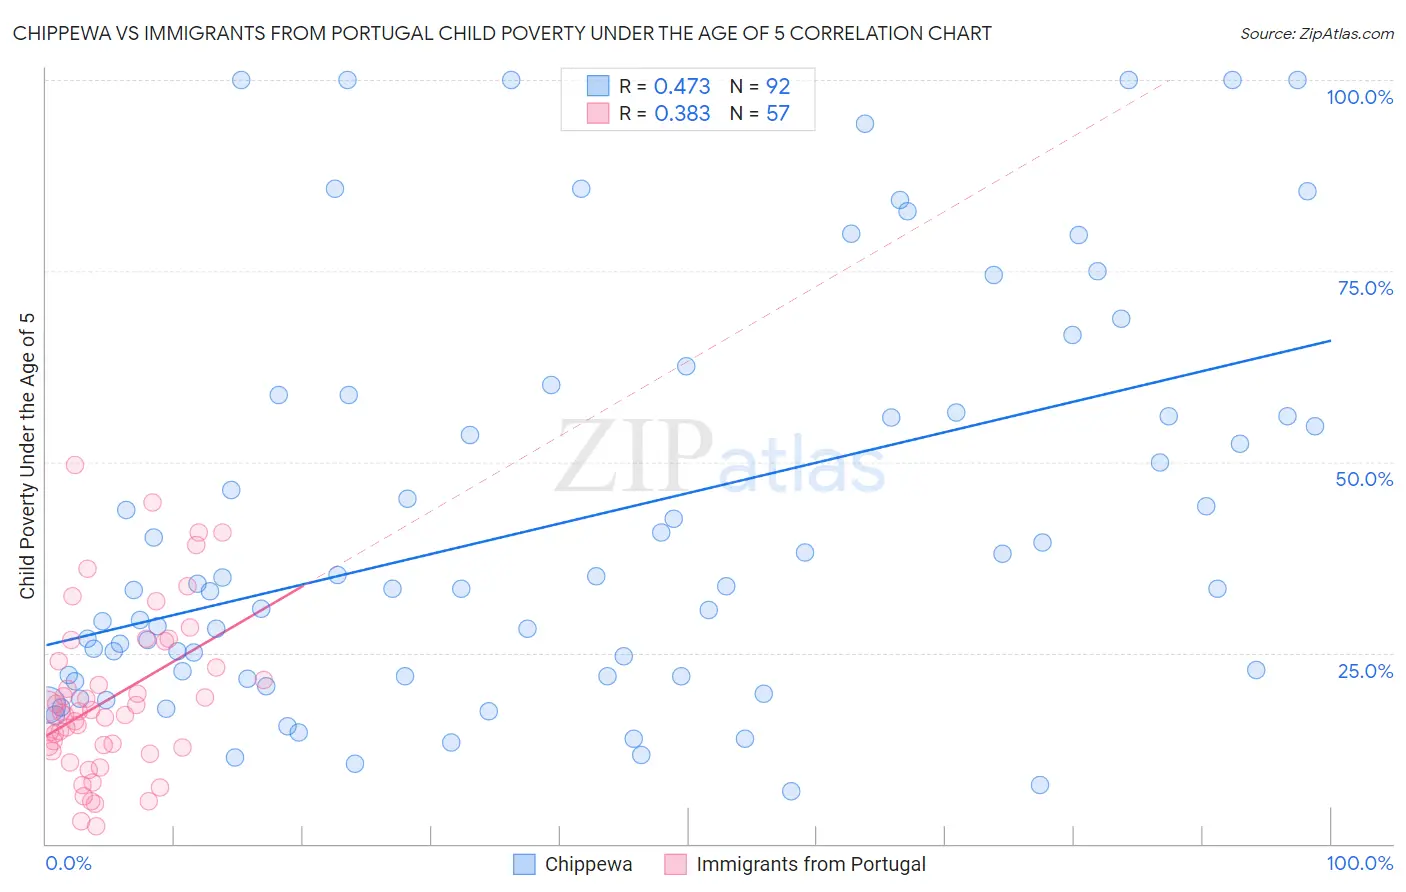 Chippewa vs Immigrants from Portugal Child Poverty Under the Age of 5